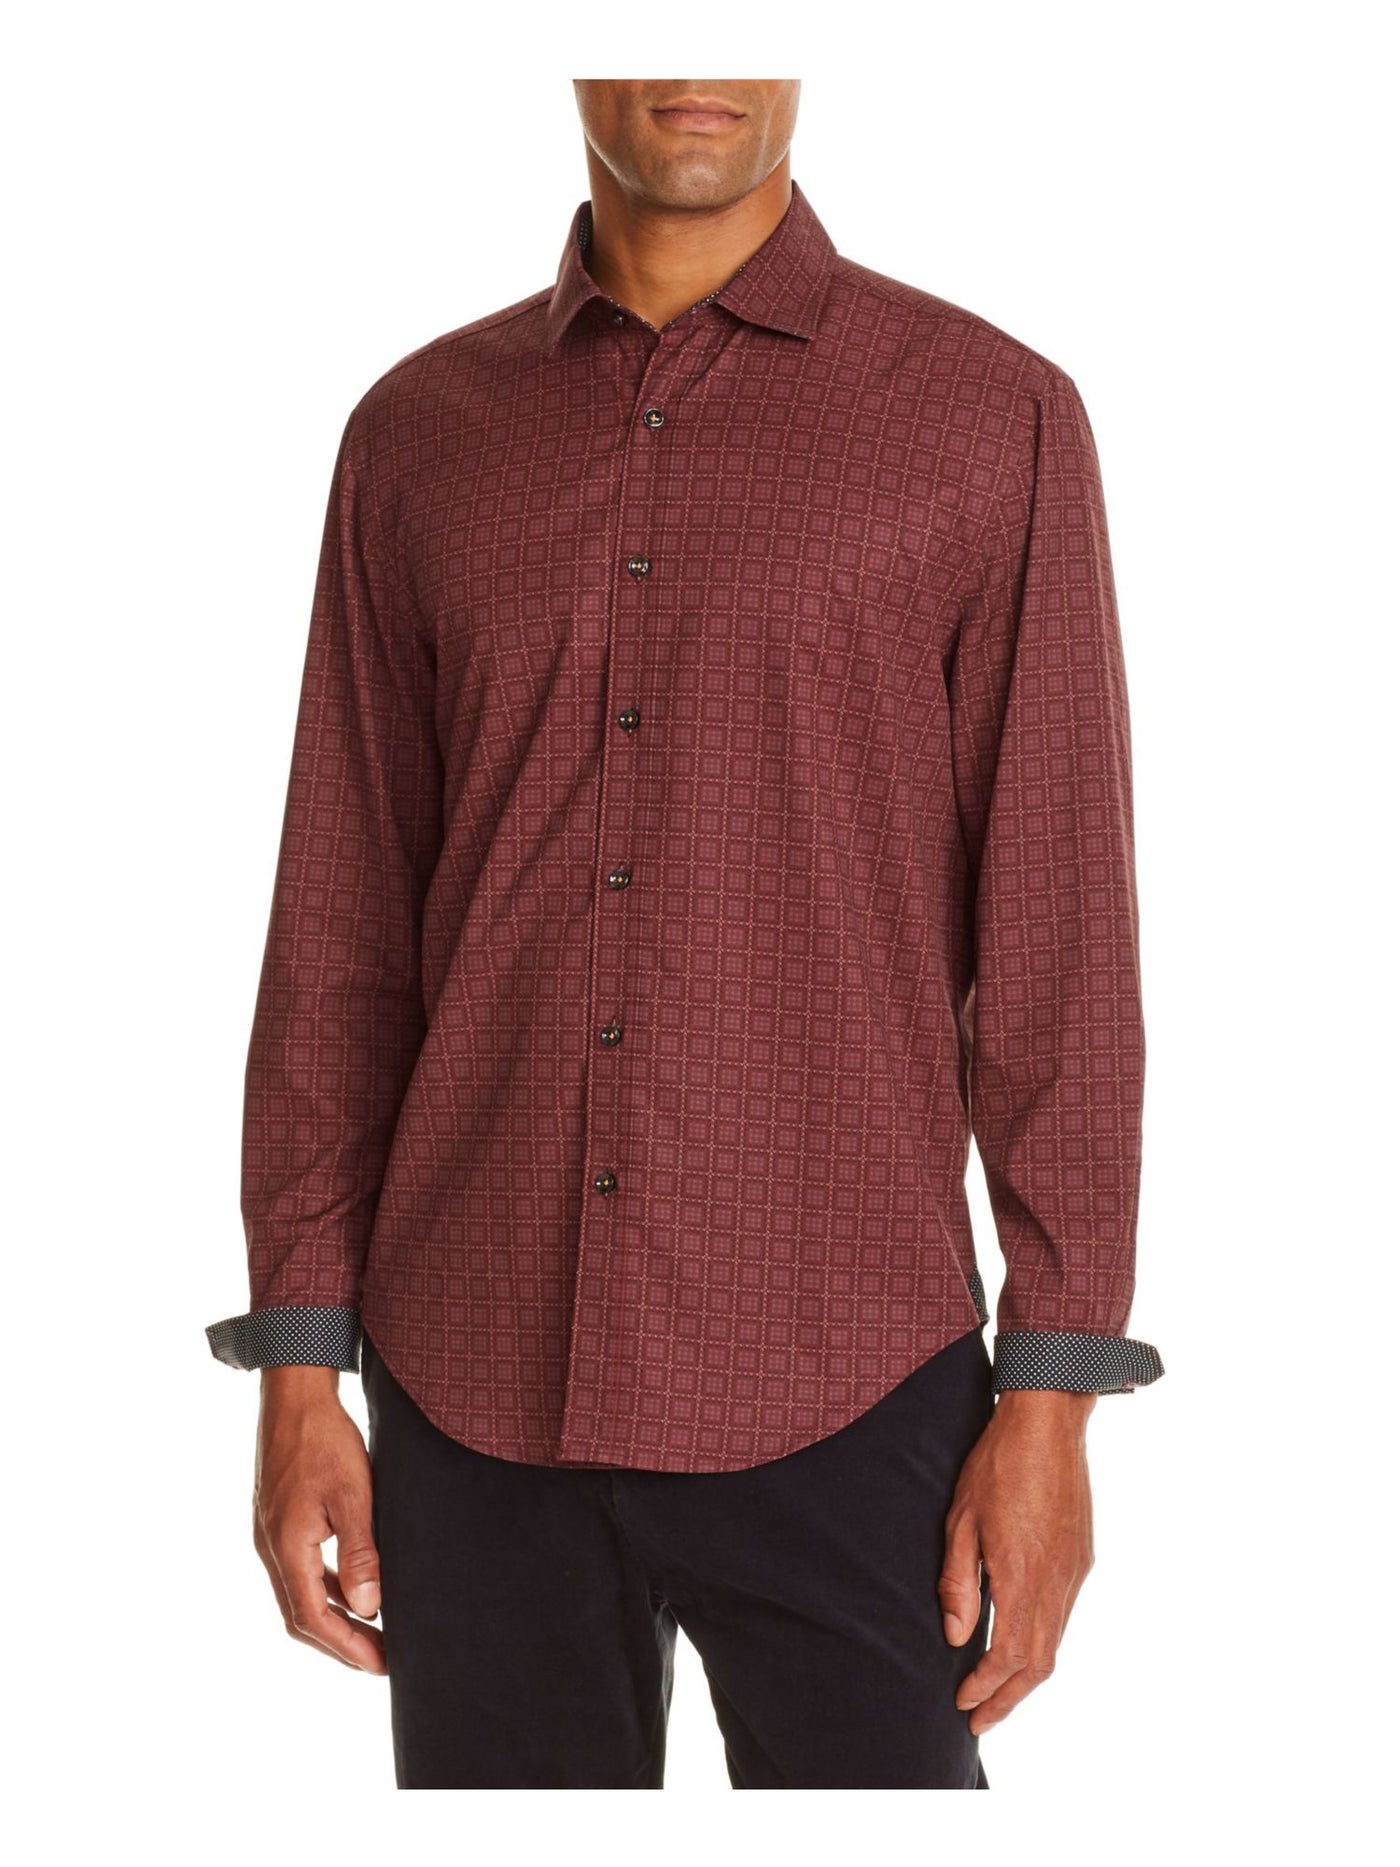 TALLIA SPORT Mens Red Patterned Button Down Stretch Casual Shirt M